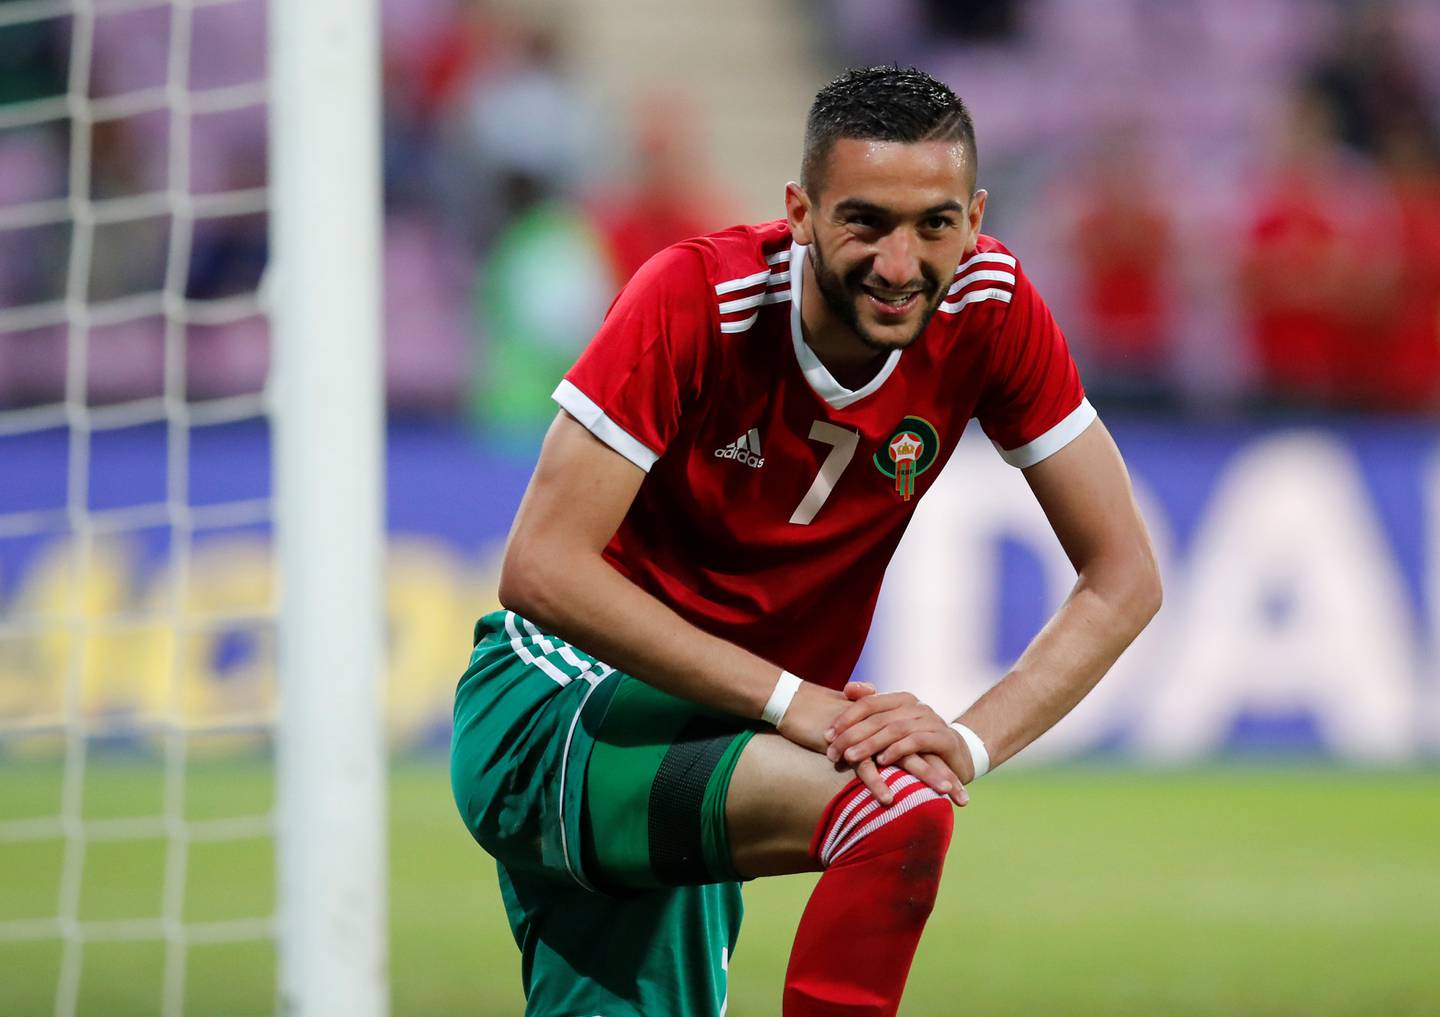 Hakim Ziyech was not picked for Afcon 2021. Reuters